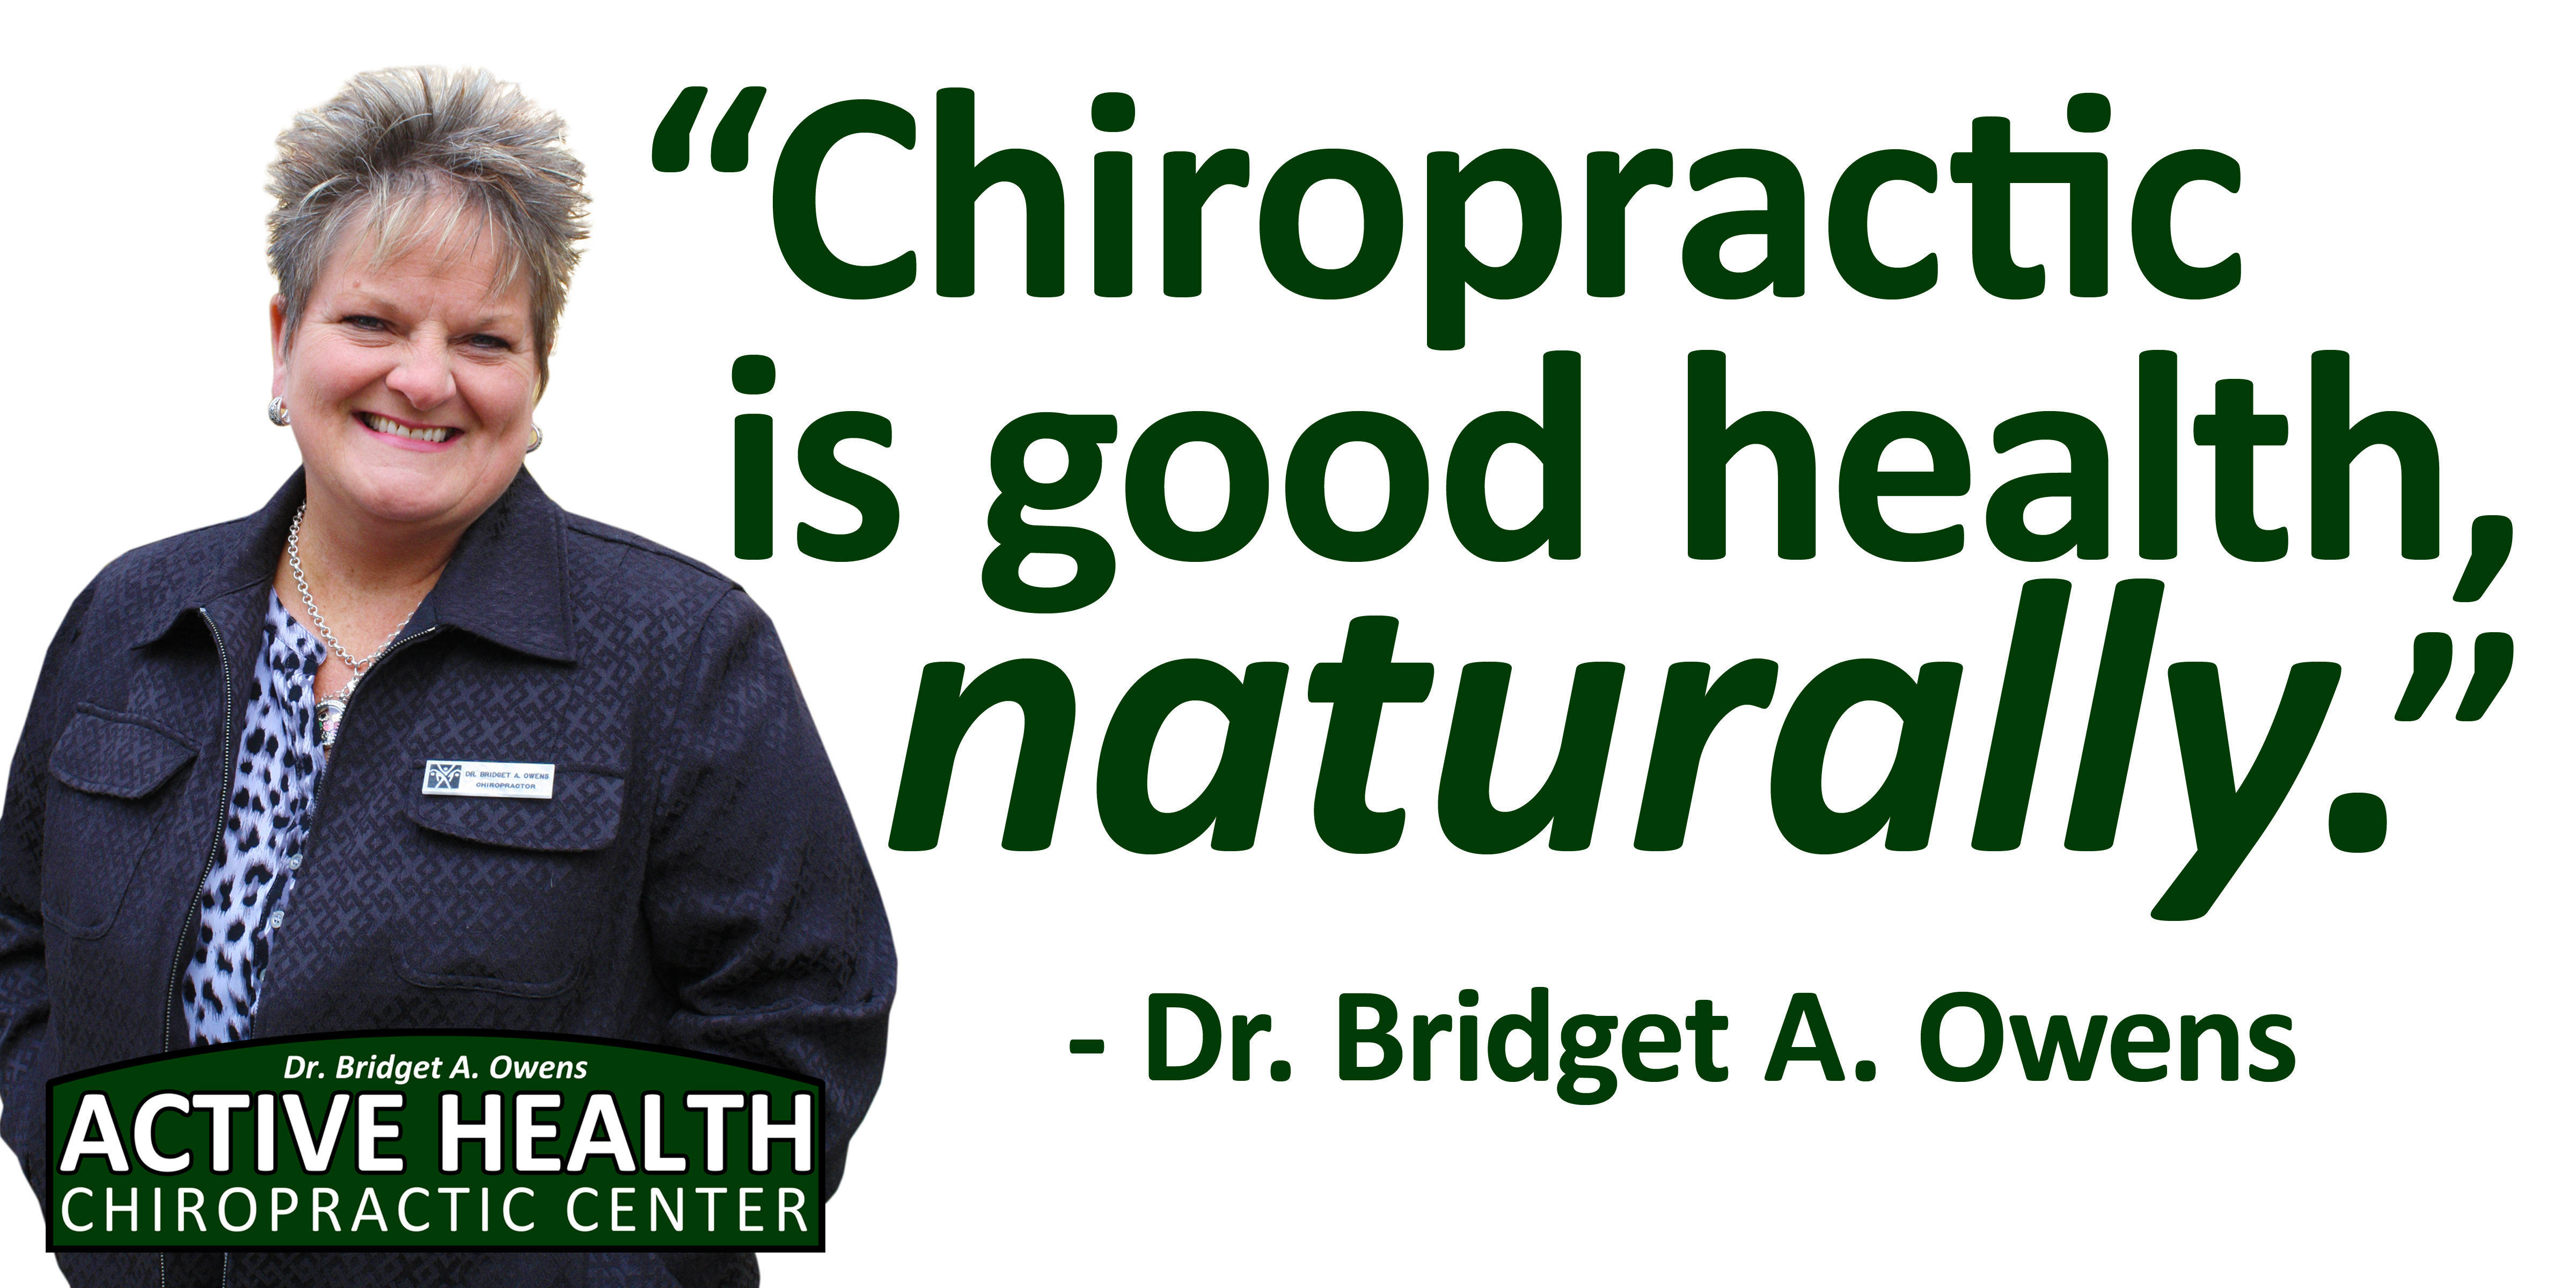 Active Health Chiropractic Center - Chiropractor In Tomah Wi Us Office Hours